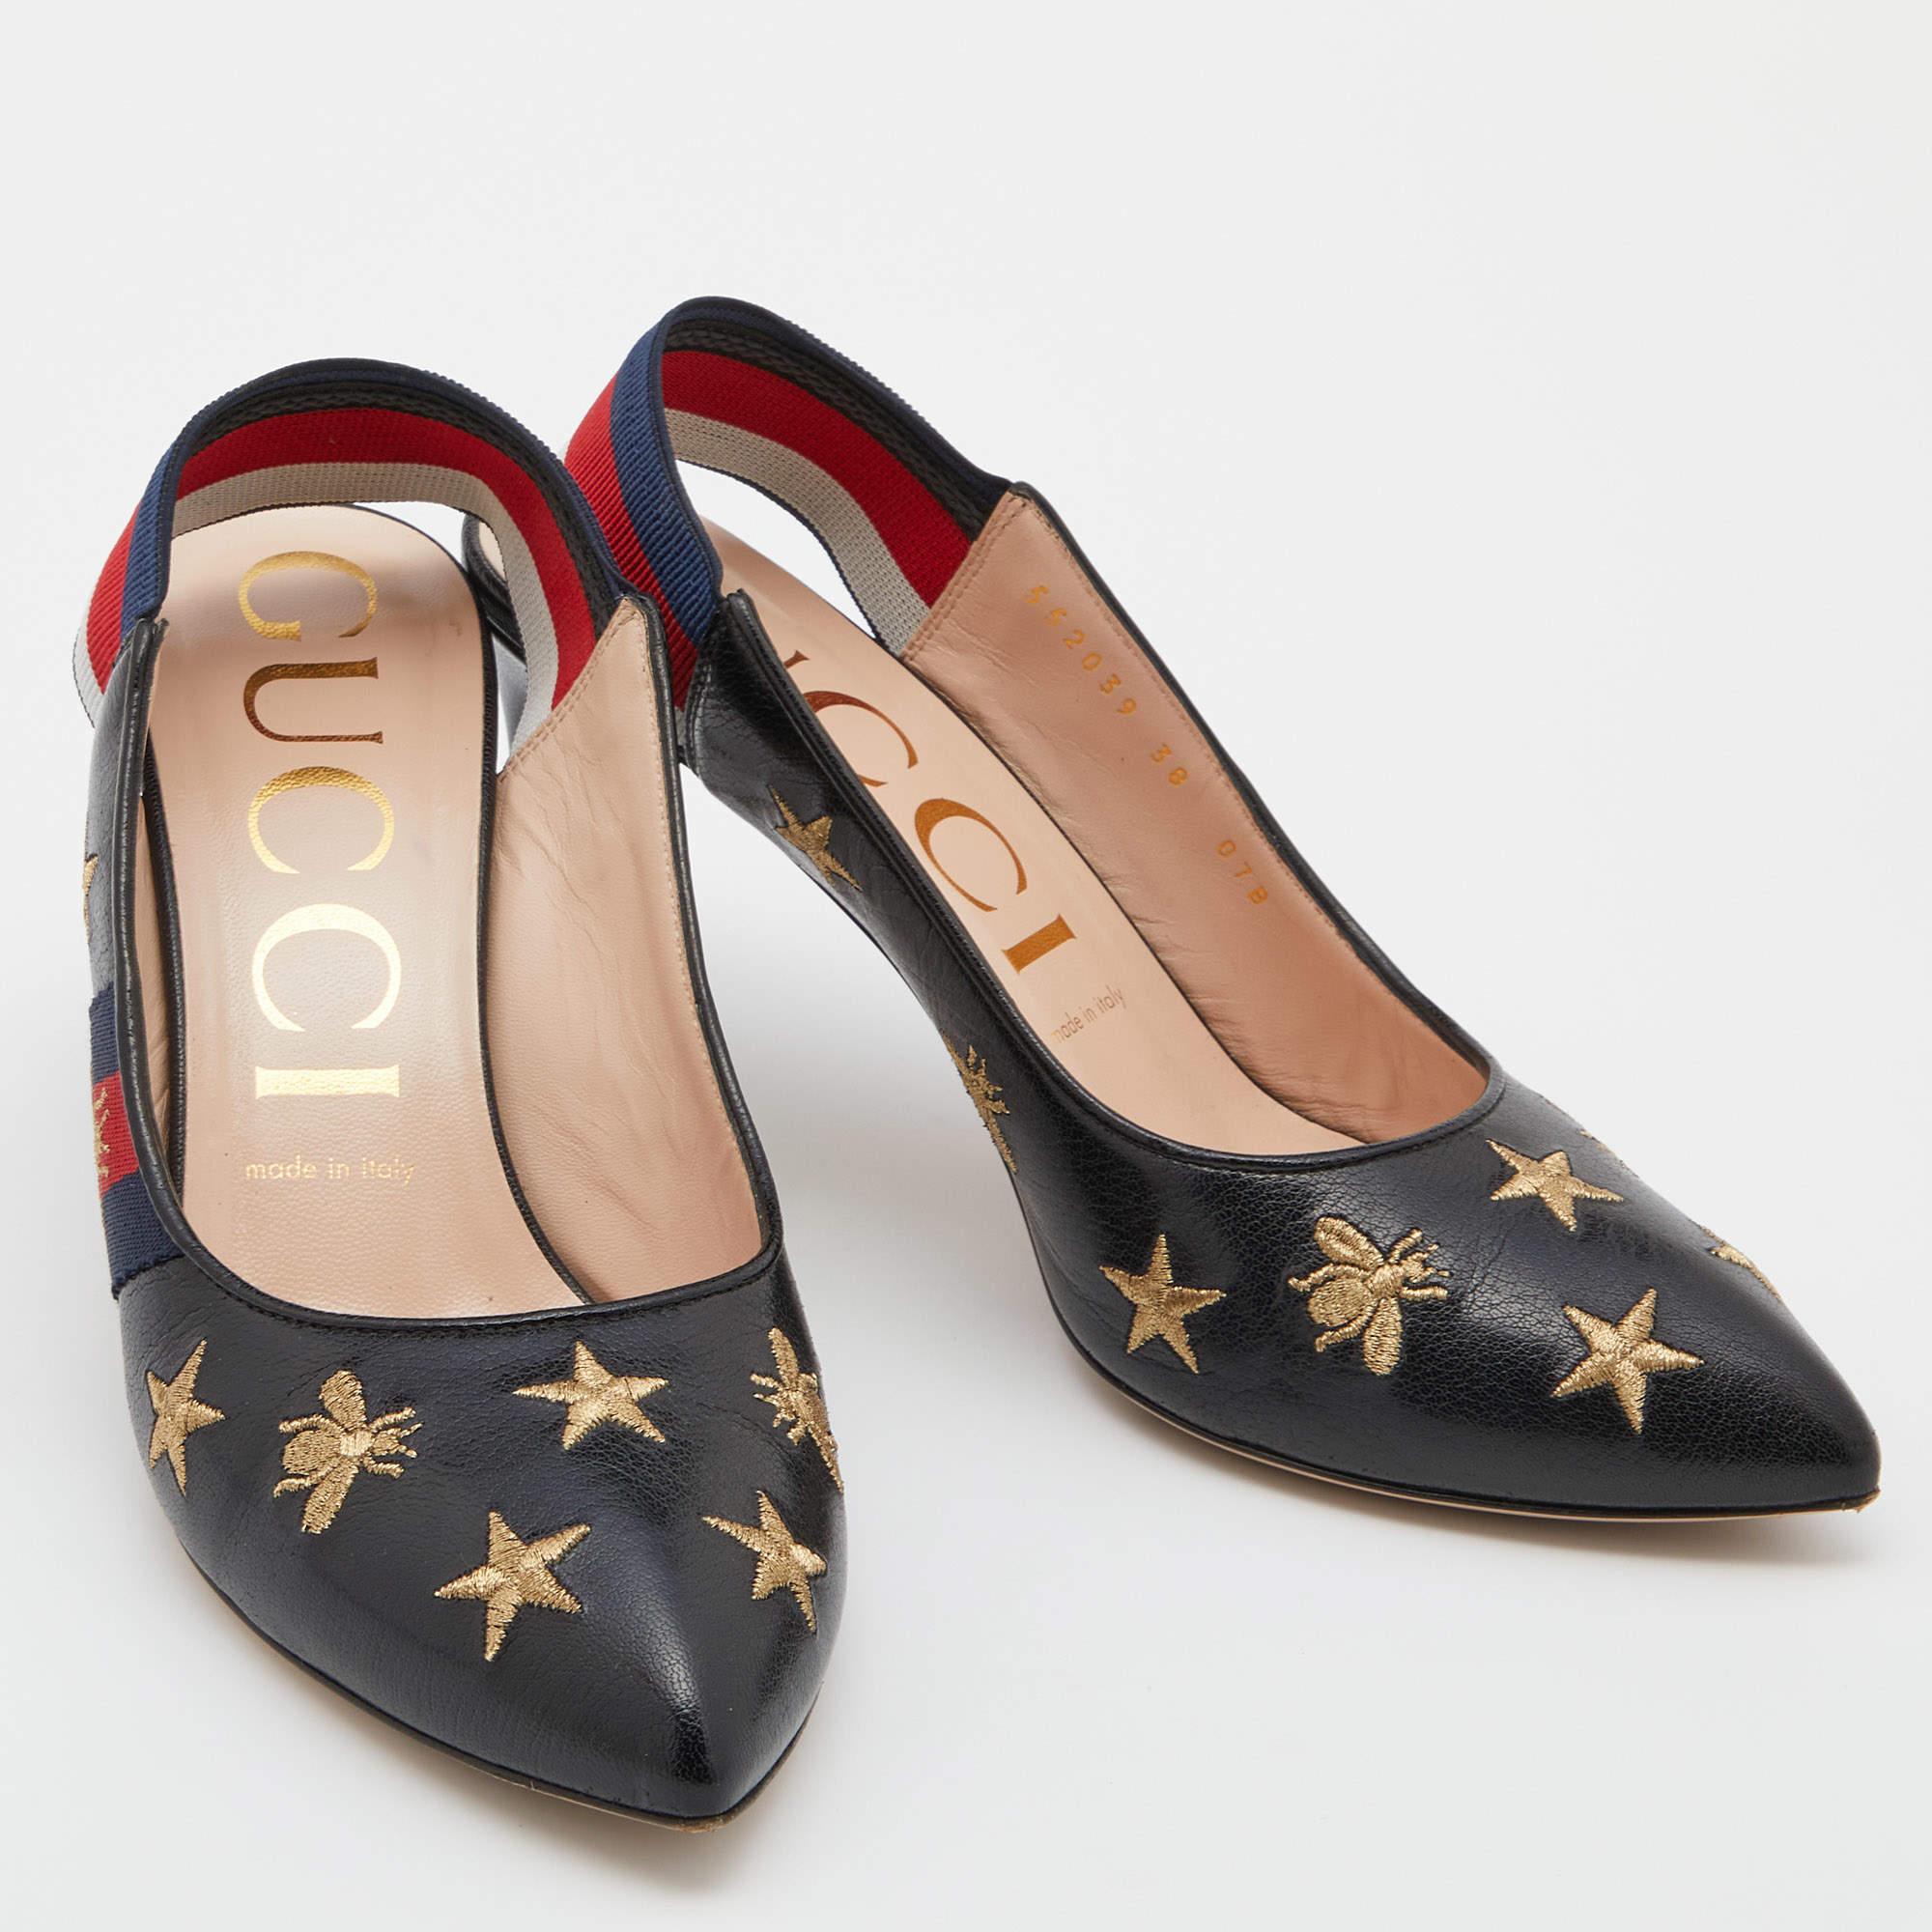 Gucci Black Bee Star Embroidered Leather Web Sylvie Slingback Pumps Size 38 In Good Condition For Sale In Dubai, Al Qouz 2